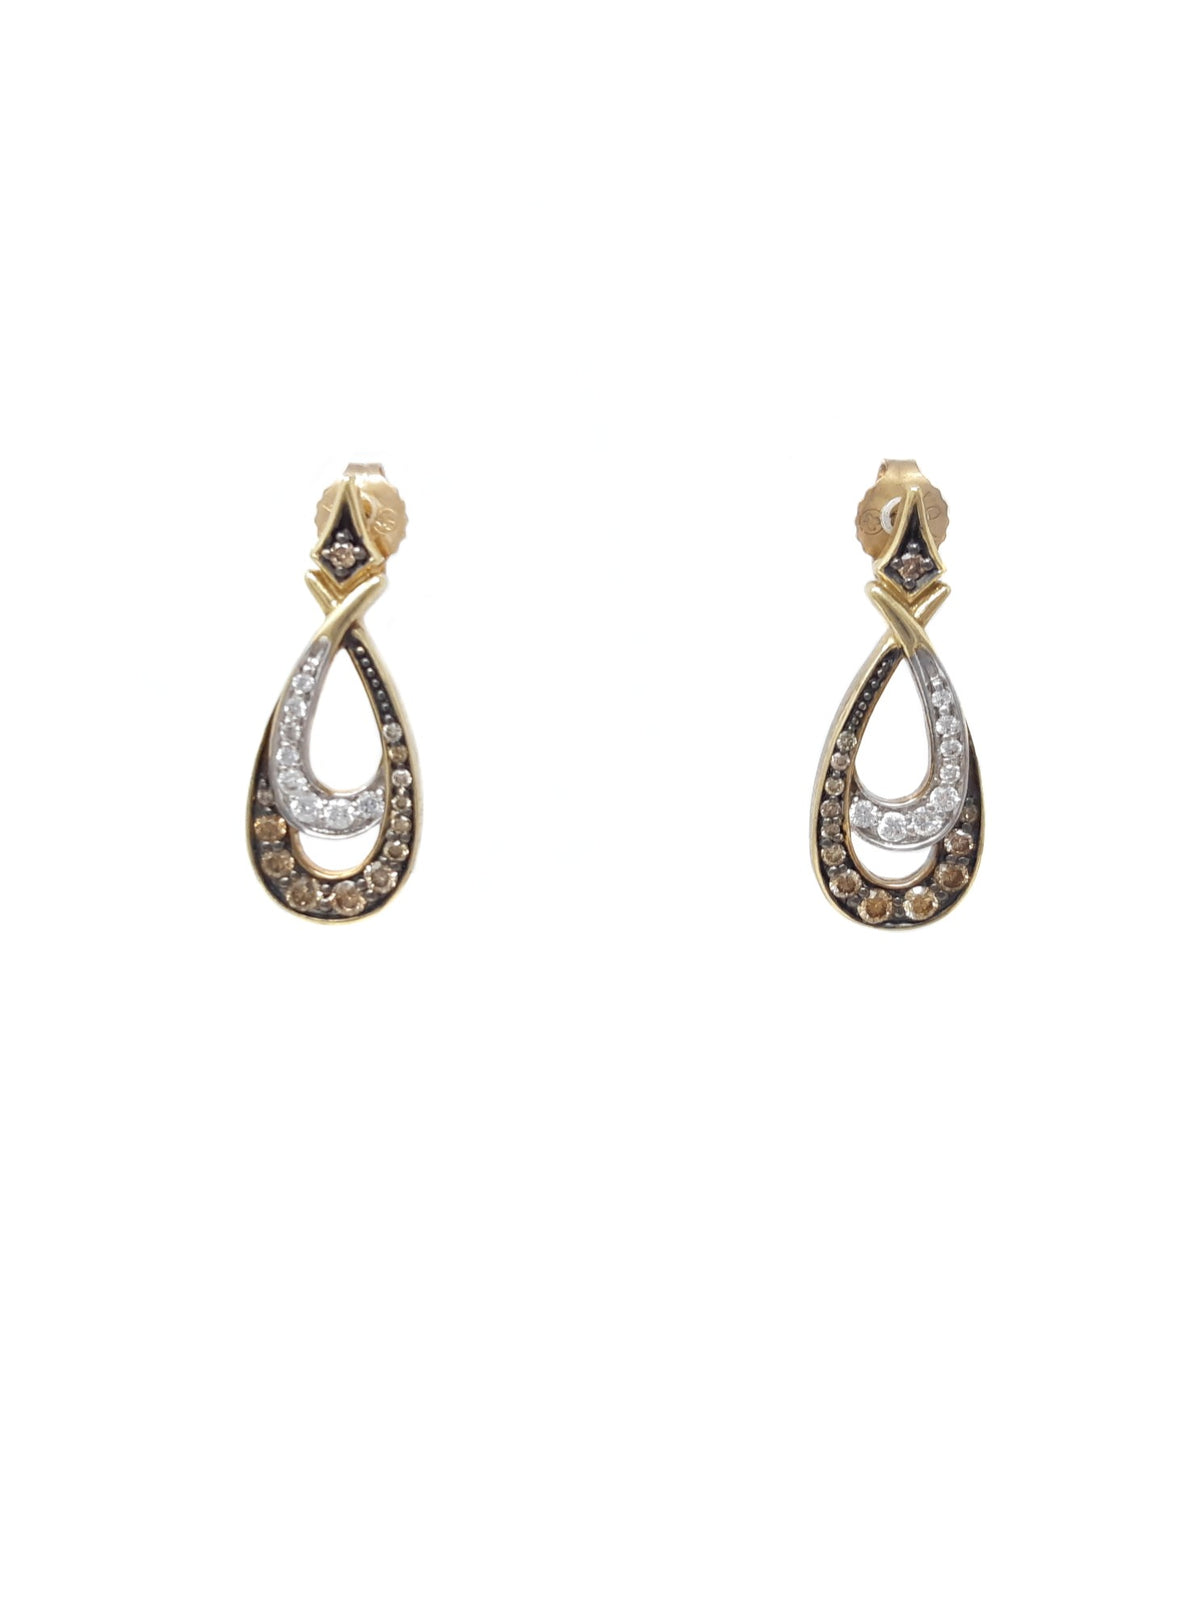 10K Natural Brown and White Diamond Earrings